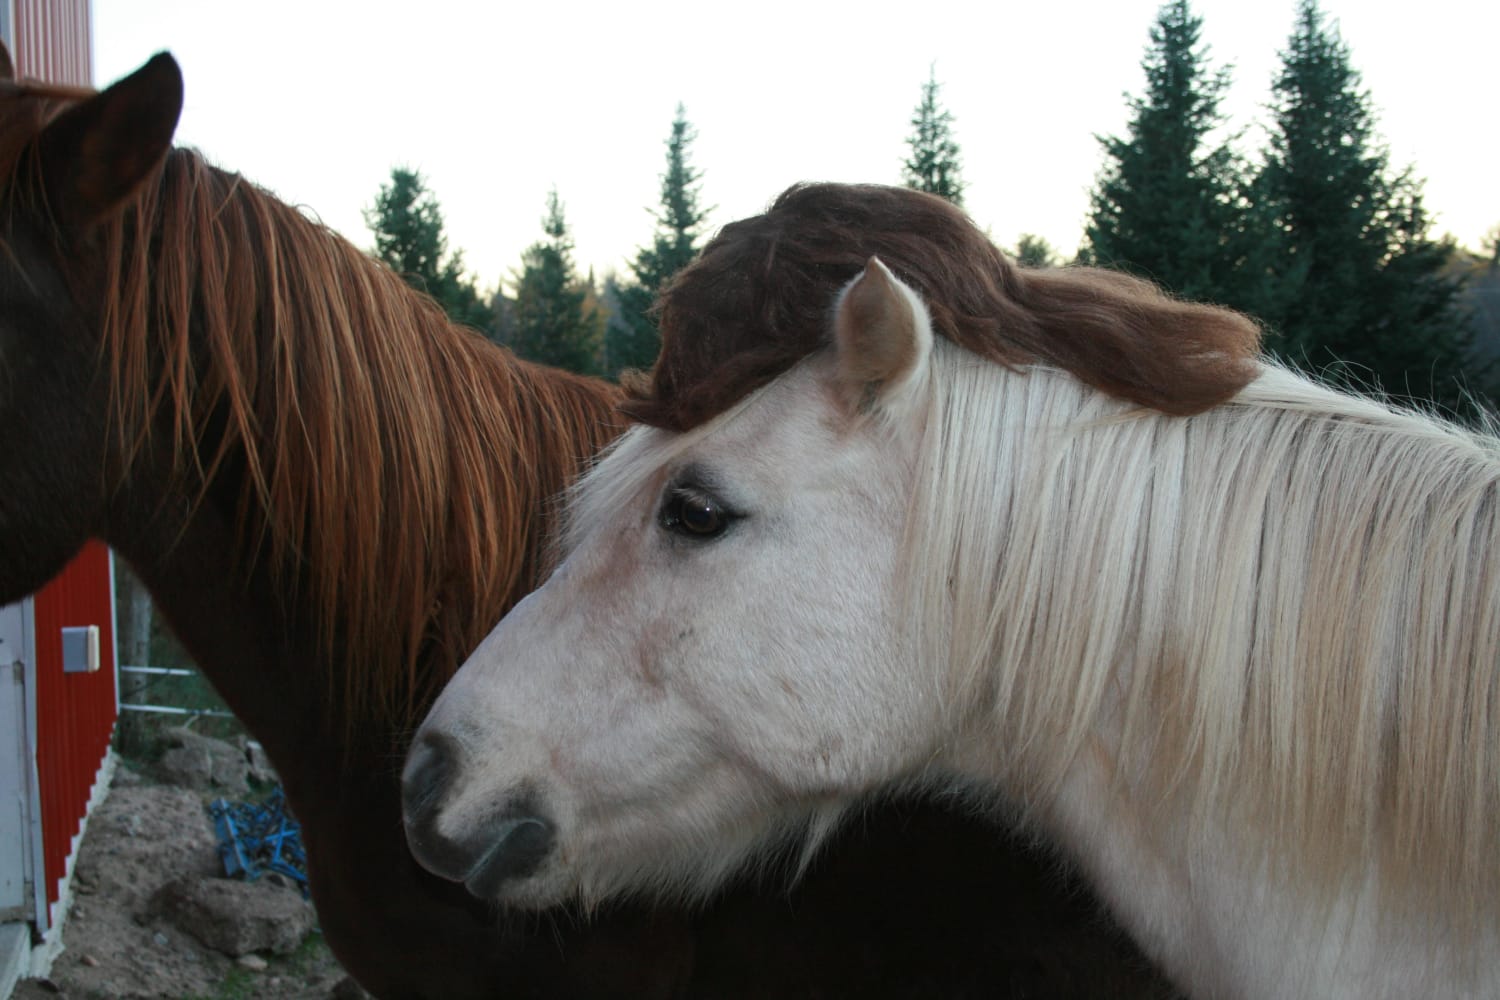 We put a mullet wig on our pony for Halloween. I think he liked it!